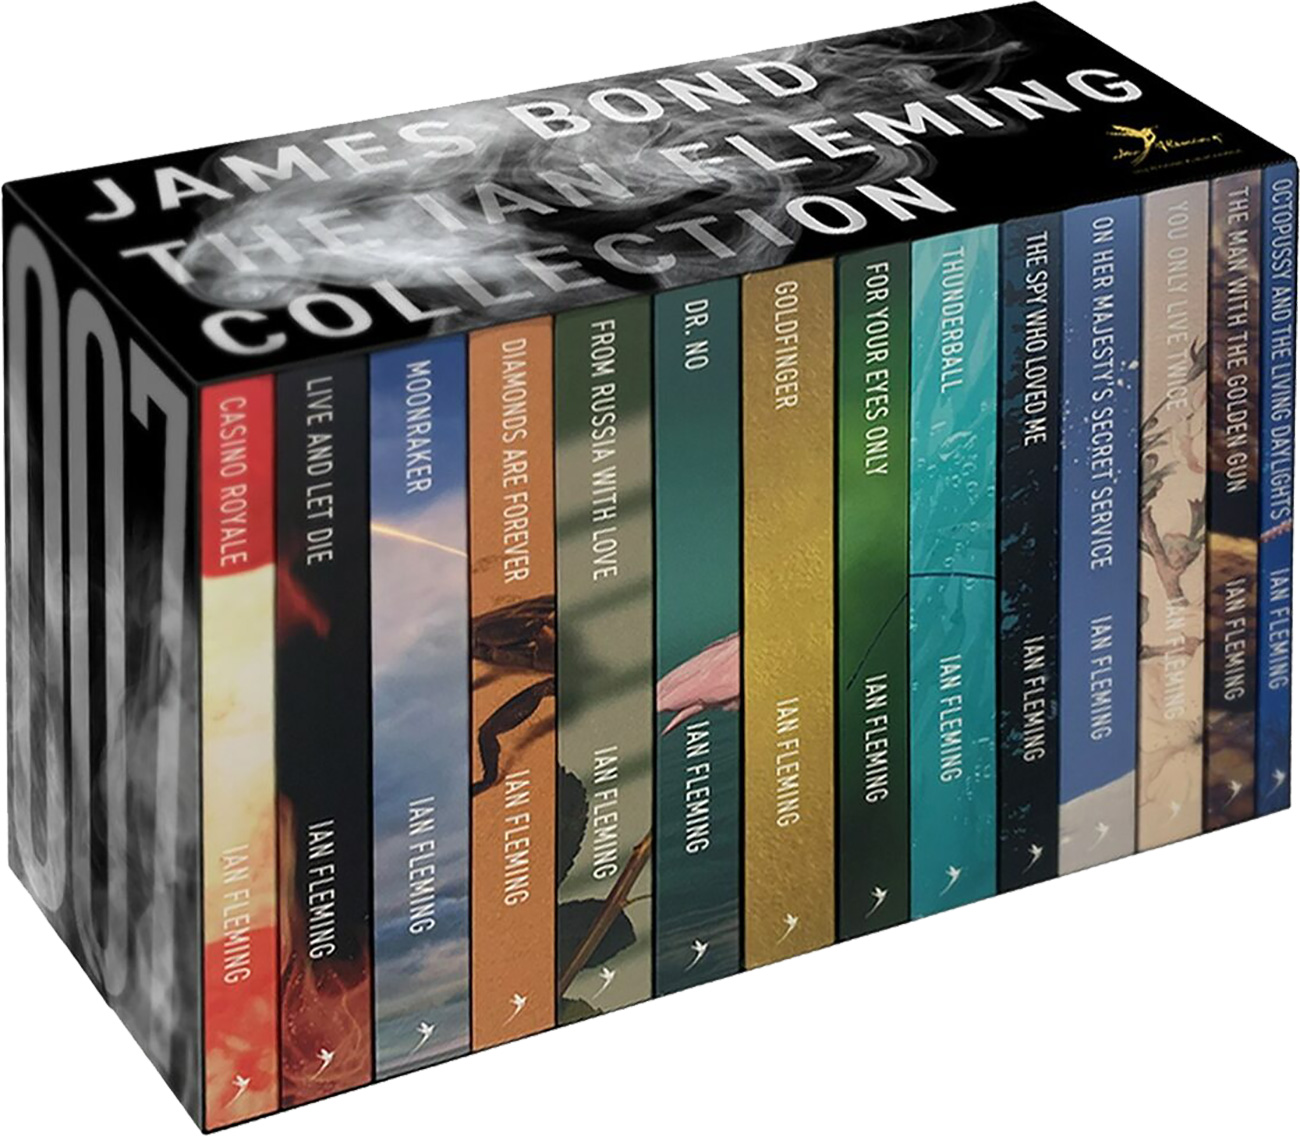 James Bond The Complete Collection Limited Edition Box Set designed by Webb Webb